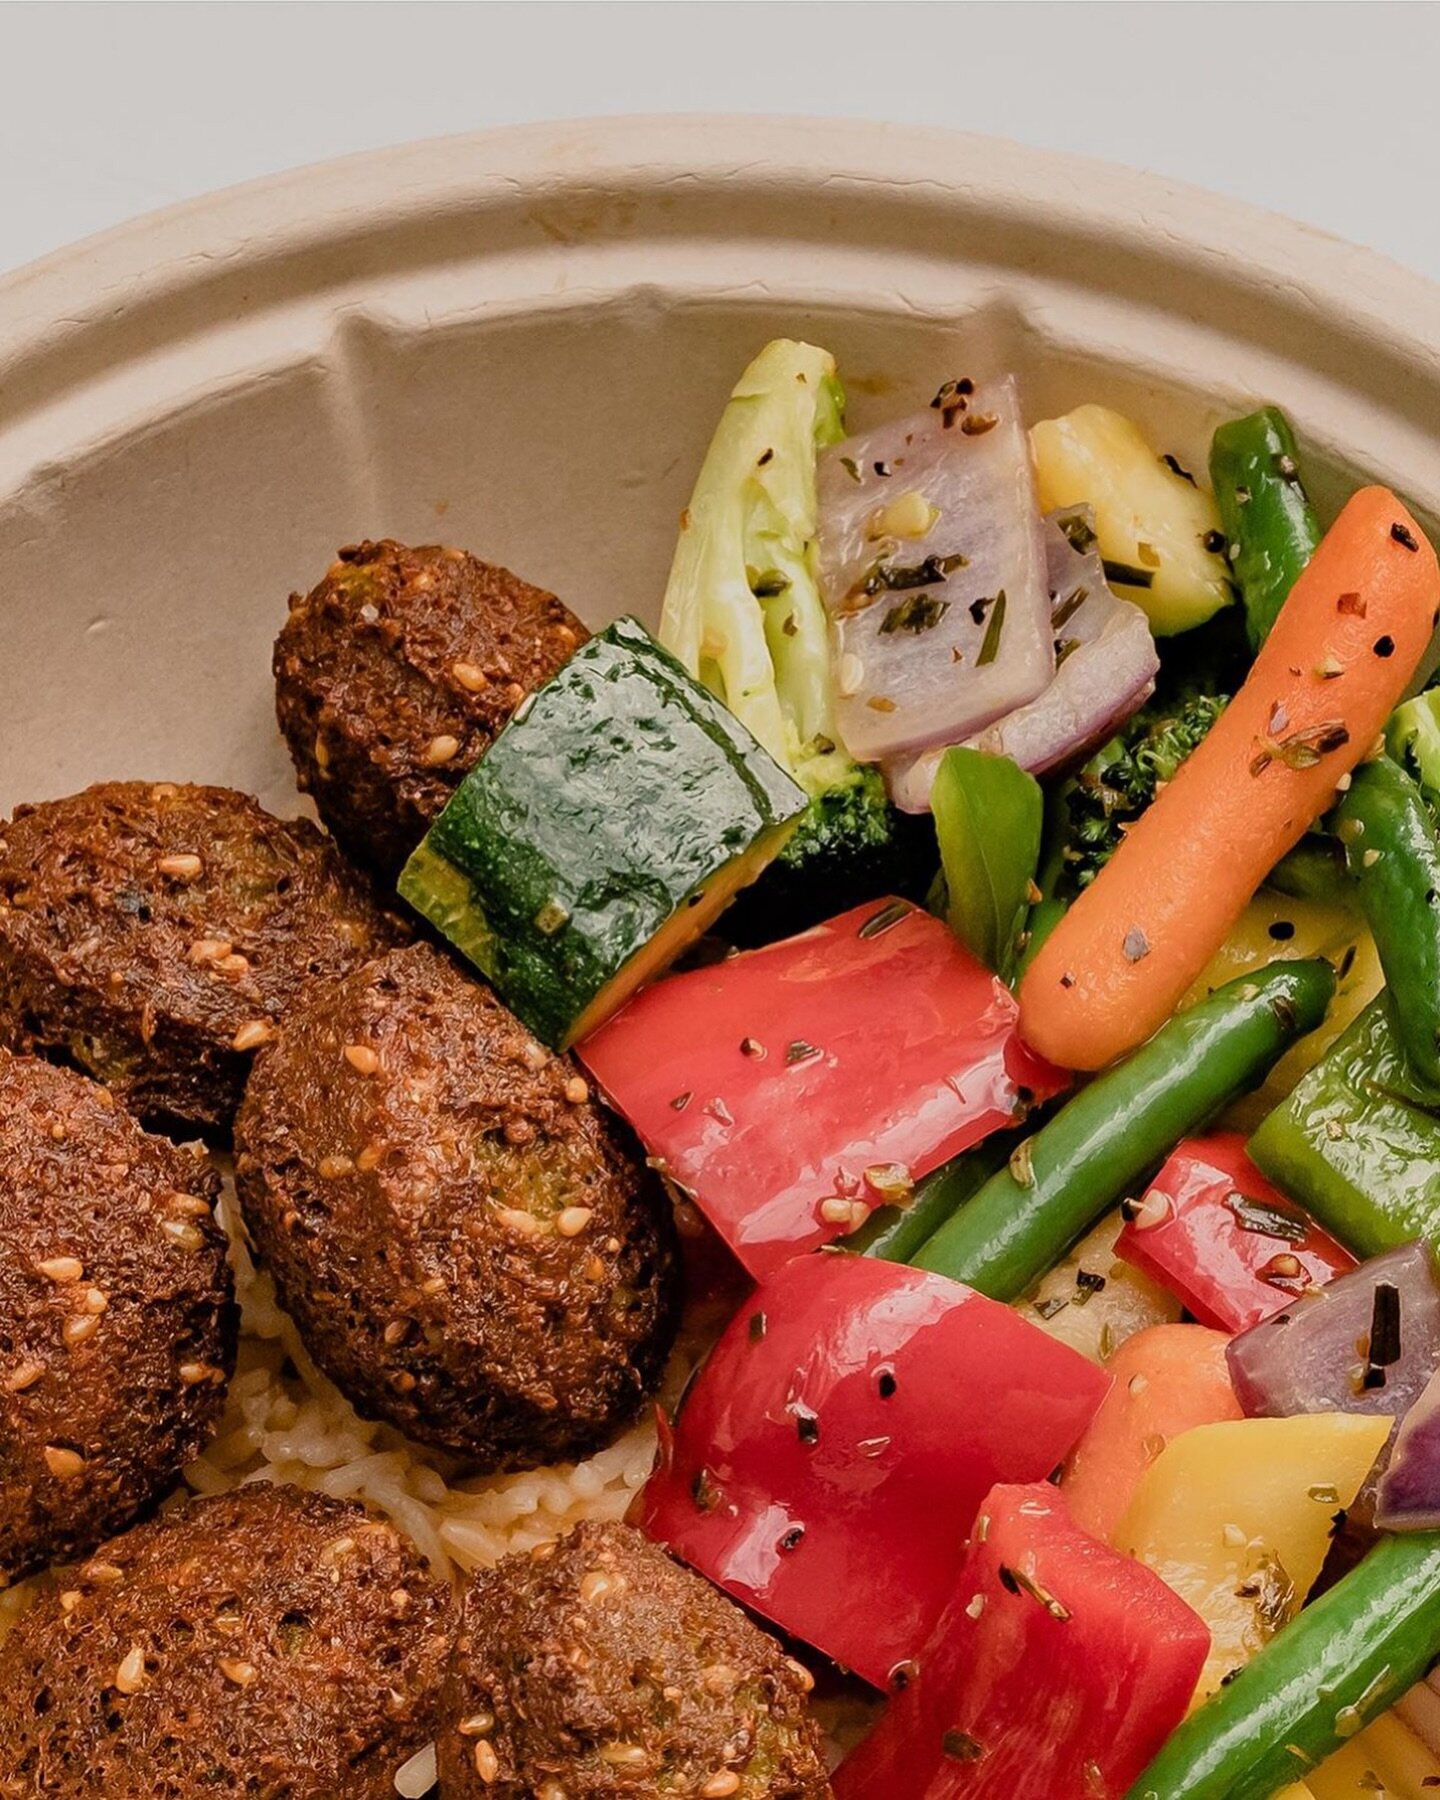 It&rsquo;s Saturday! You know what to do... GO TO AVIVA FOR SOME **HOT FALAFEL**

Our Midtown location is open every Saturday from 11 AM - 8:30 PM!

#avivabykameel
#kameelcares
#halalcooking
#MediterraneanDiet